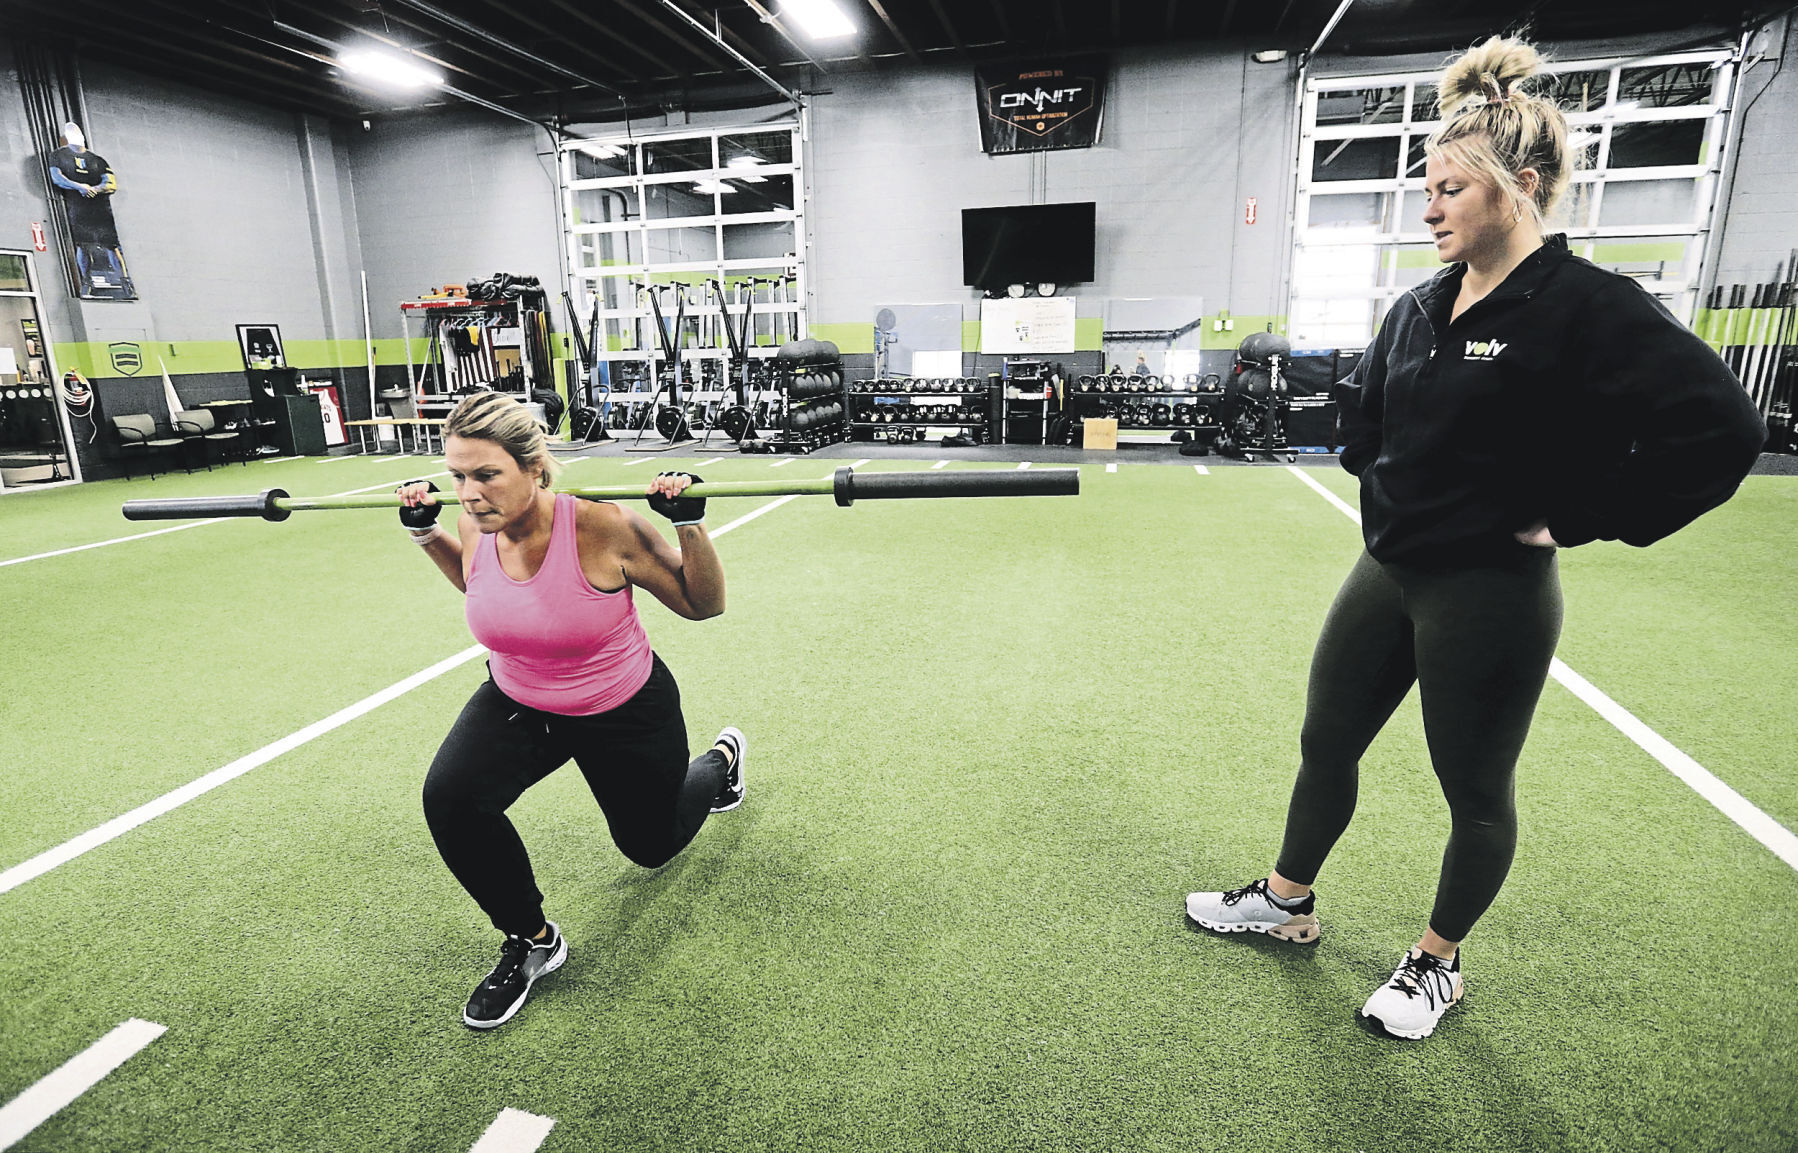 Personal trainer Cassie Hamer (right) works with Vanessa Cahill, of Maquoketa, Iowa, at Volv Fitness in Dubuque on Thursday, March 31, 2022.    PHOTO CREDIT: JESSICA REILLY